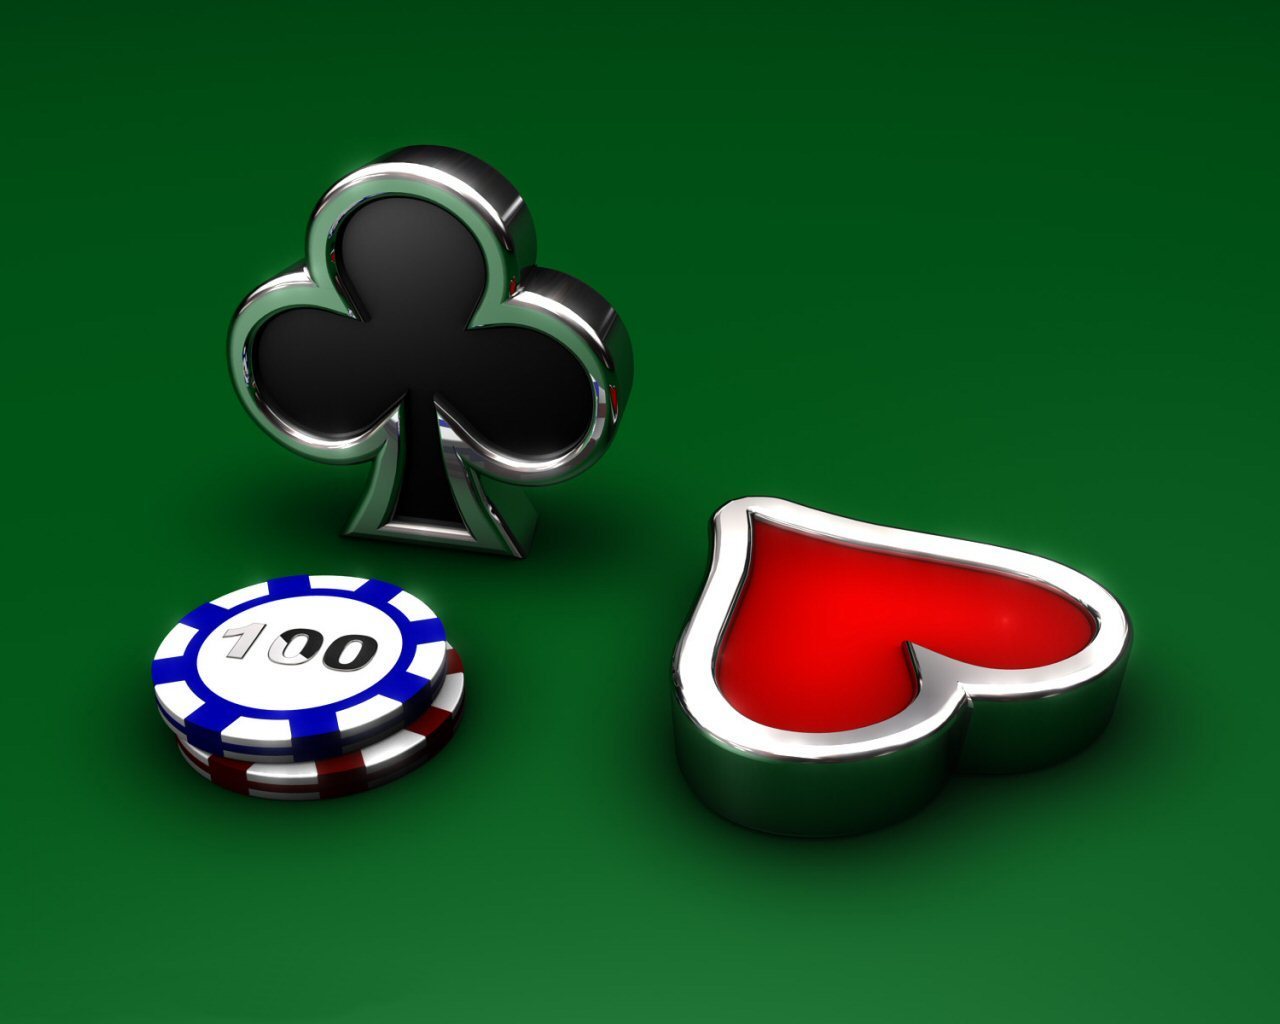 Bwo99 Online Poker: Where Skill Meets Fortune